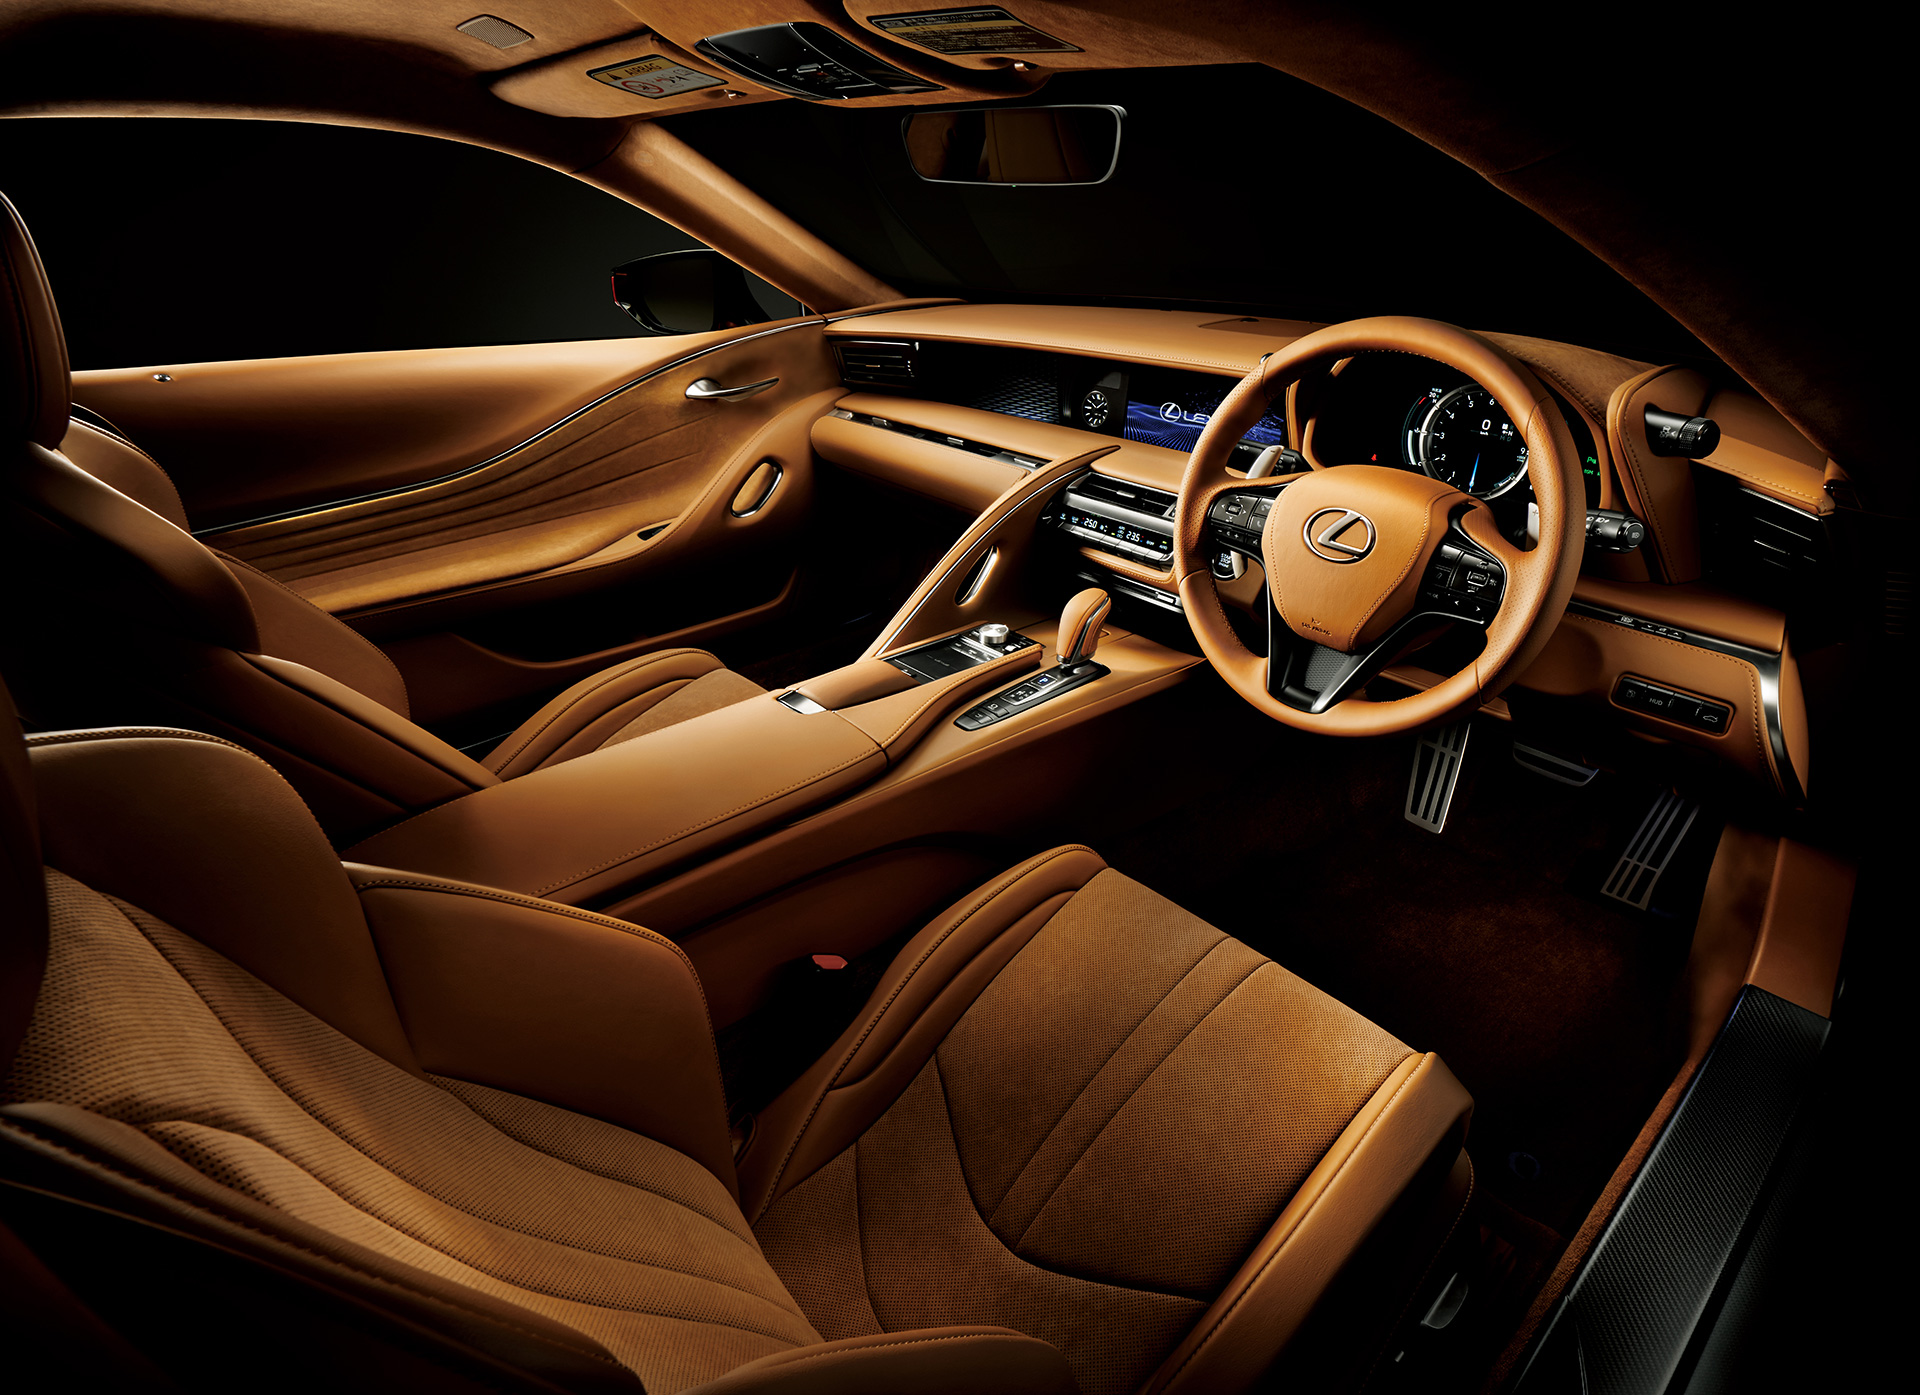 Lc 500 S Package Ochre Interior Color Options Shown Toyota Motor Corporation Official Global Website